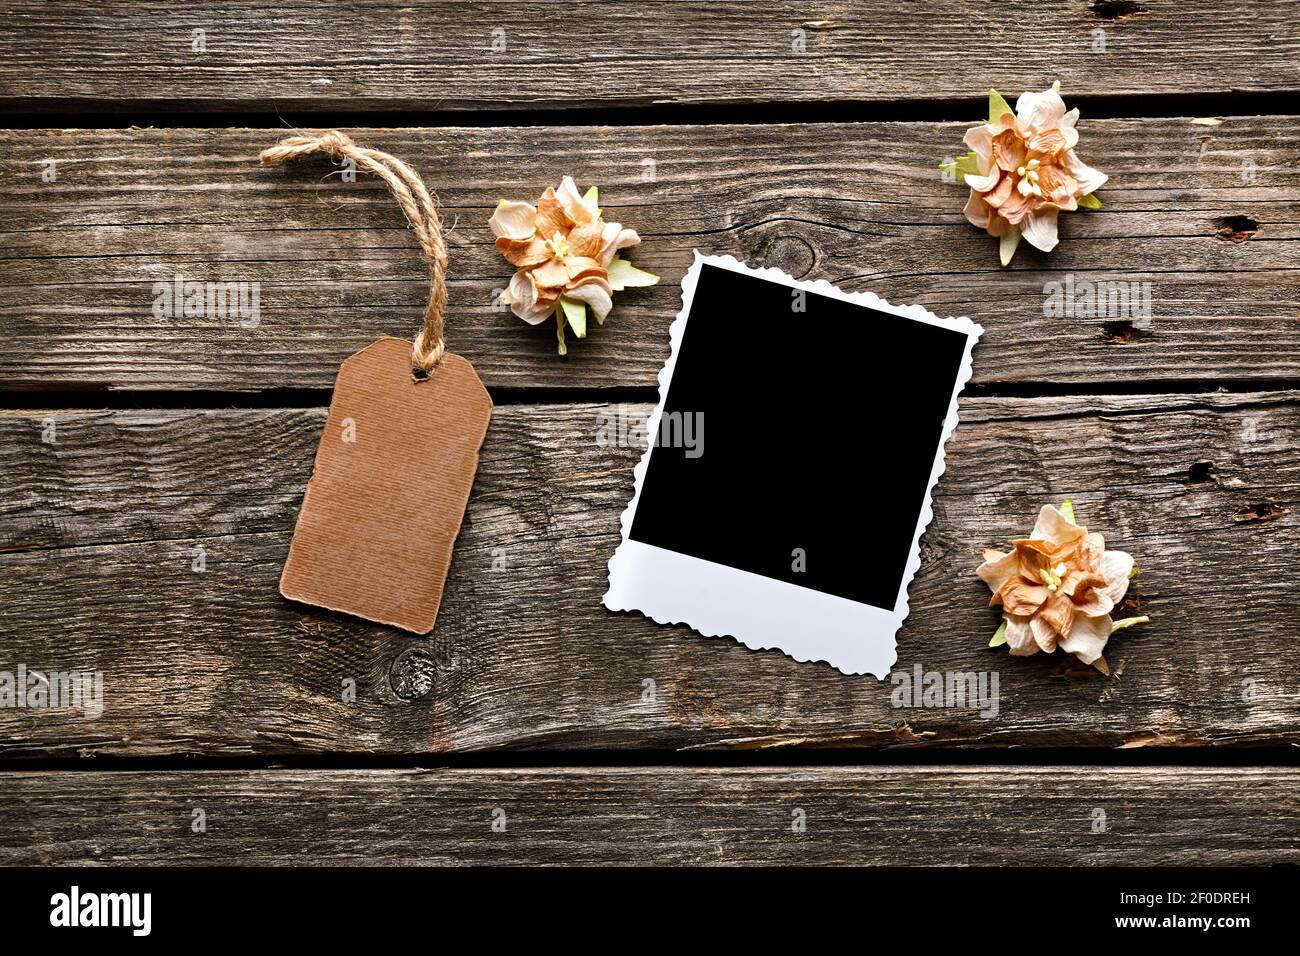 Instant photo frame with gift tag and flowers Stock Photo